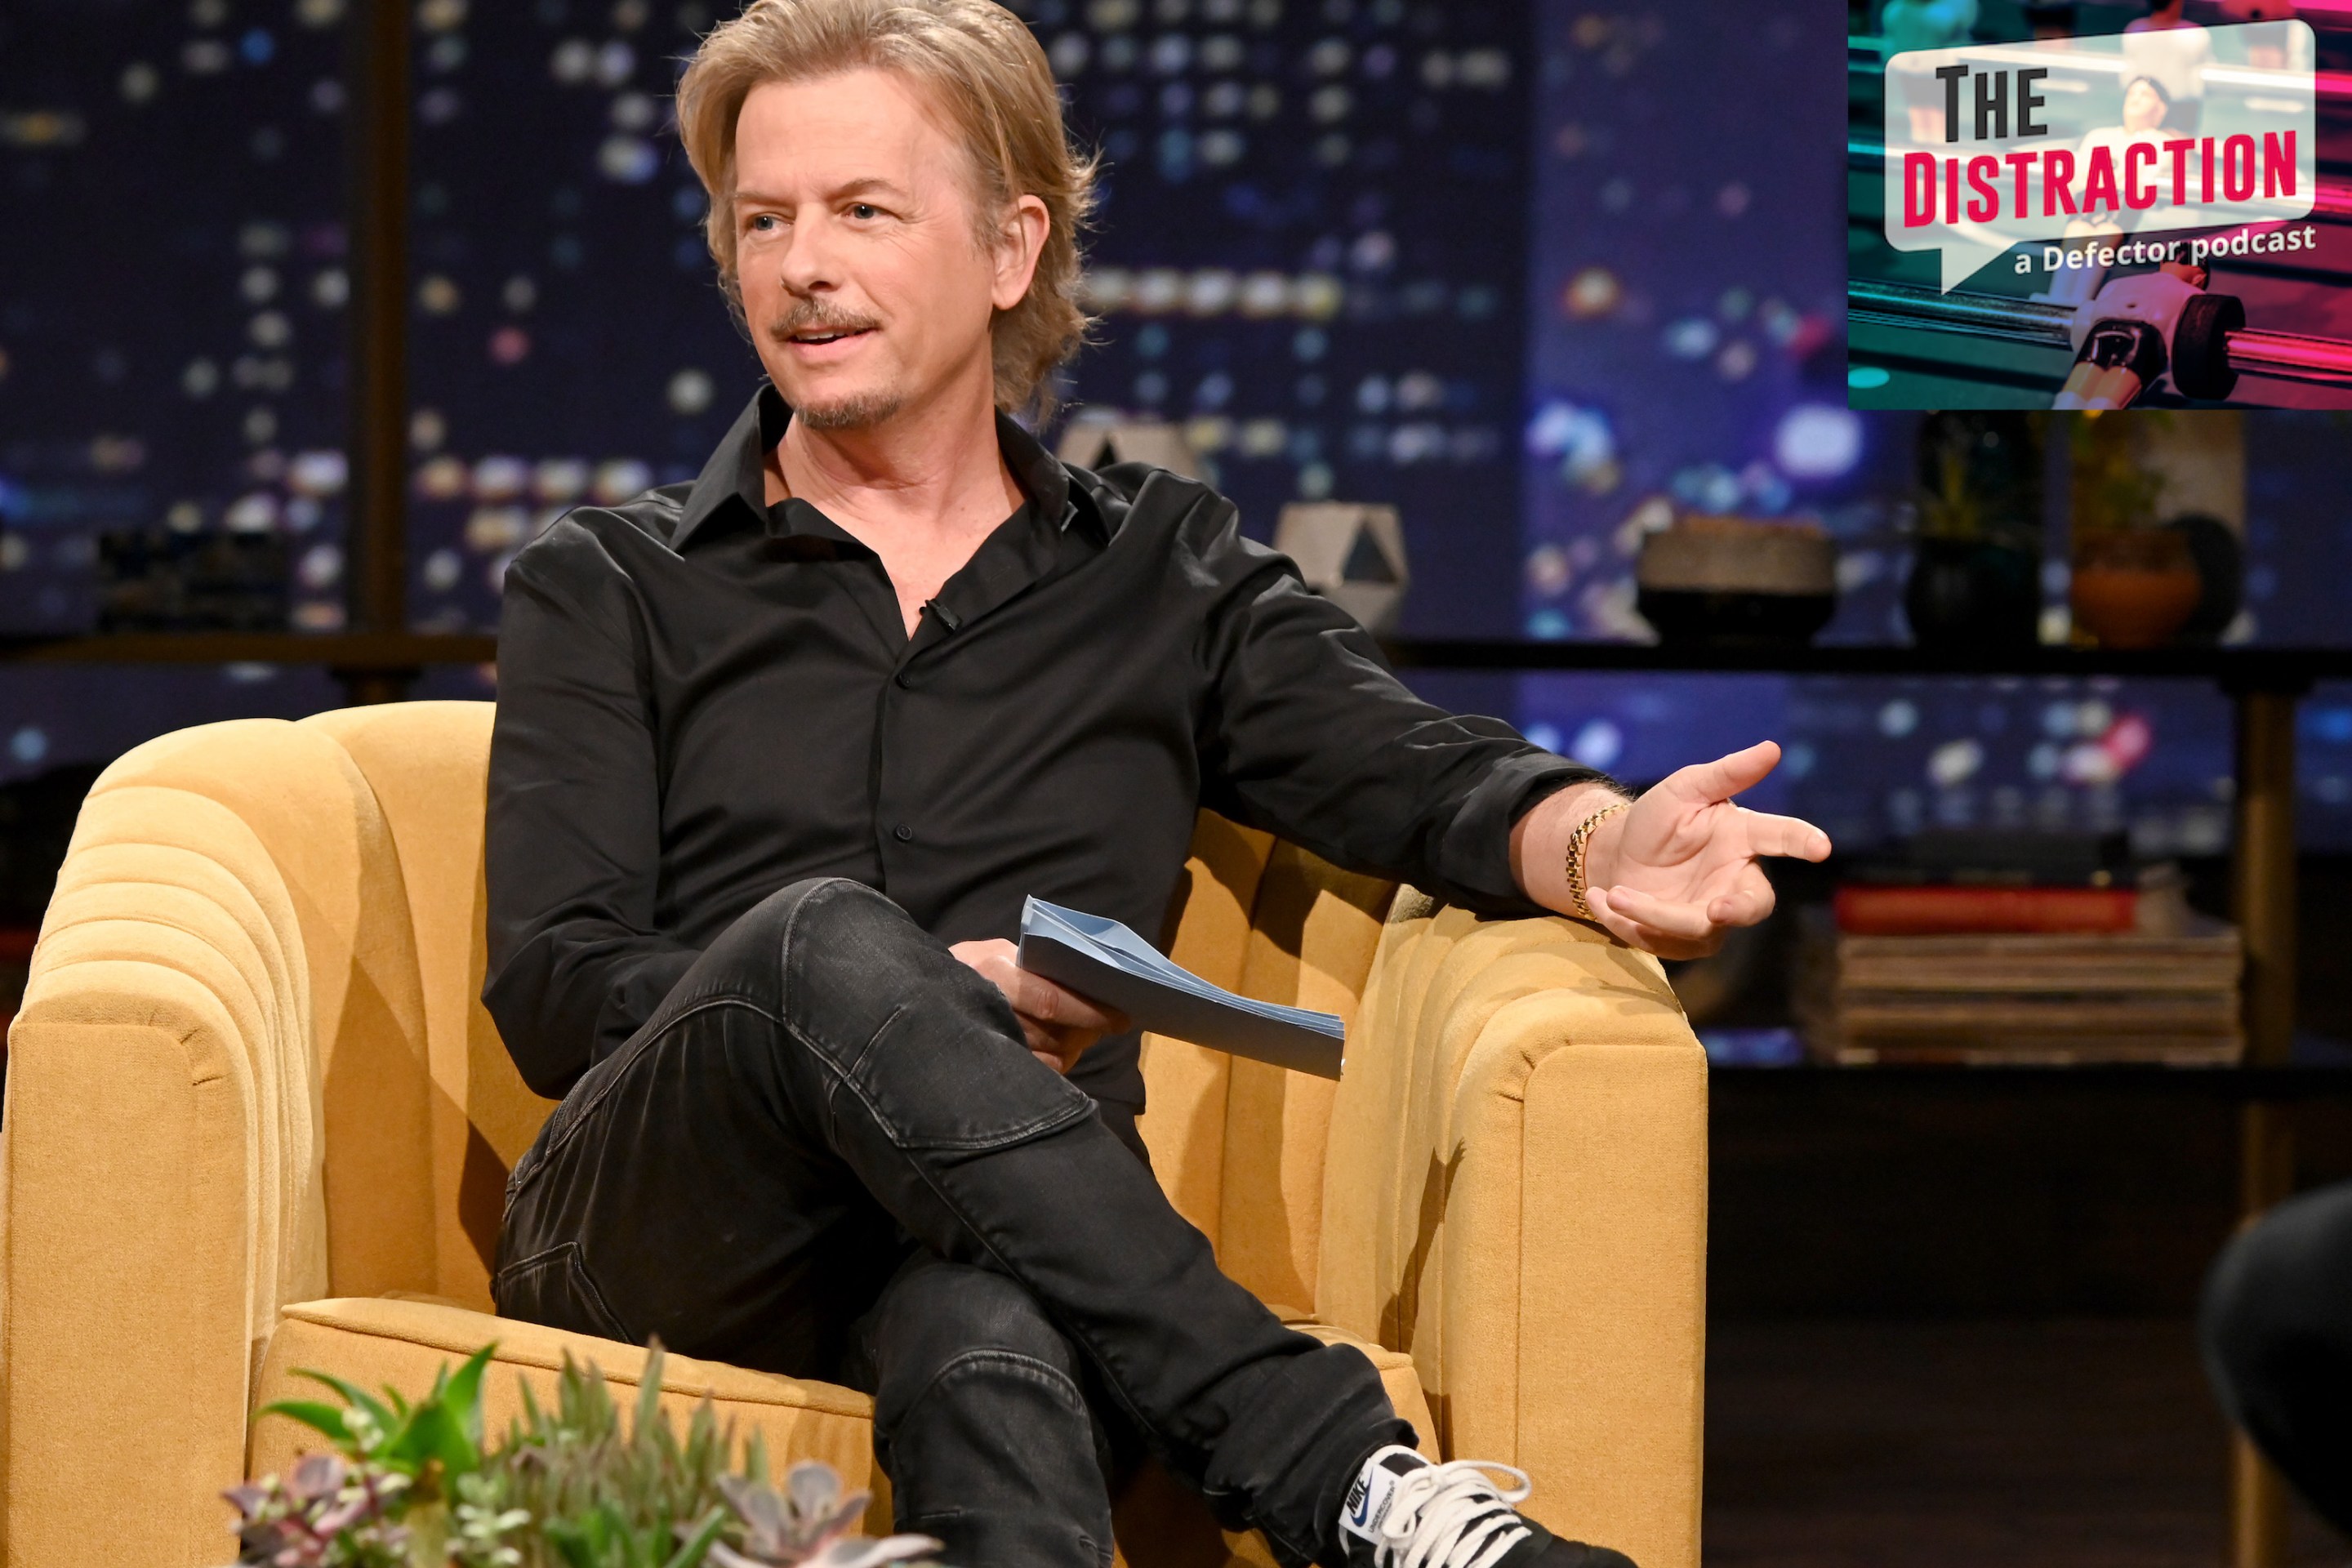 David Spade on the set of his 2019 late-night series on Comedy Central.